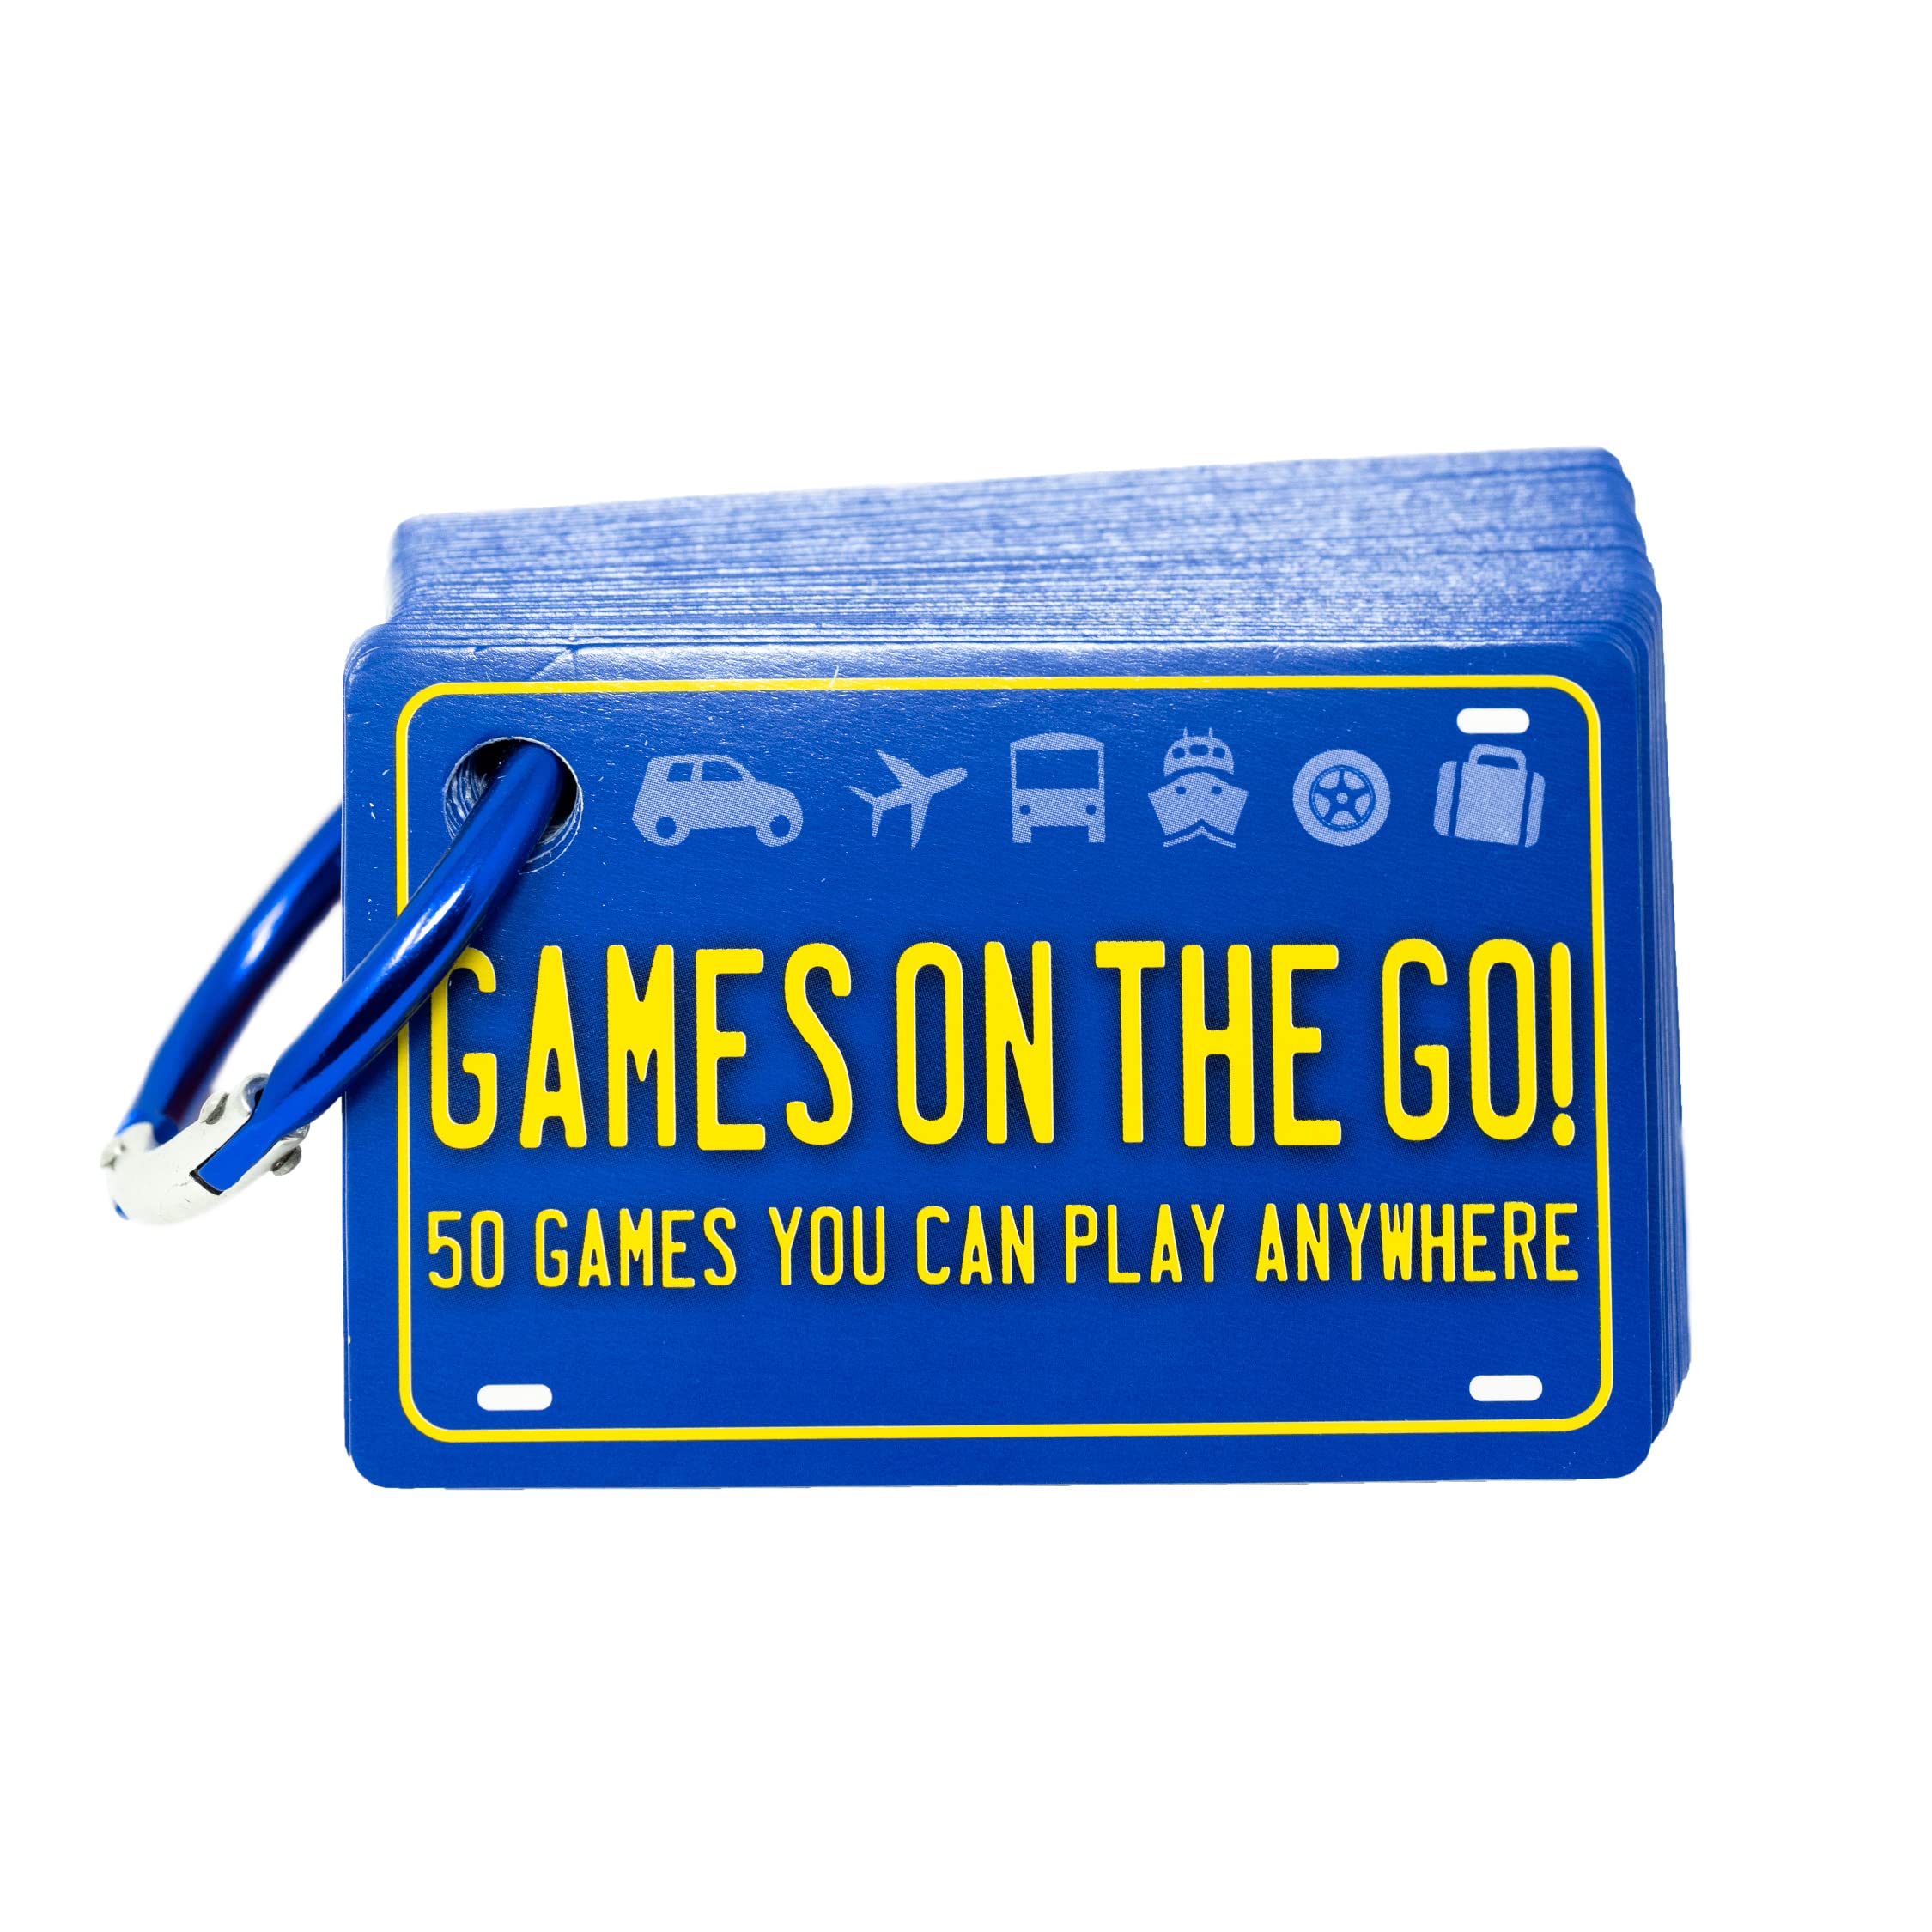 Games on the Go by Continuum Games - Portable Roadtrip Family Games to Challenge and Entertain , Blue